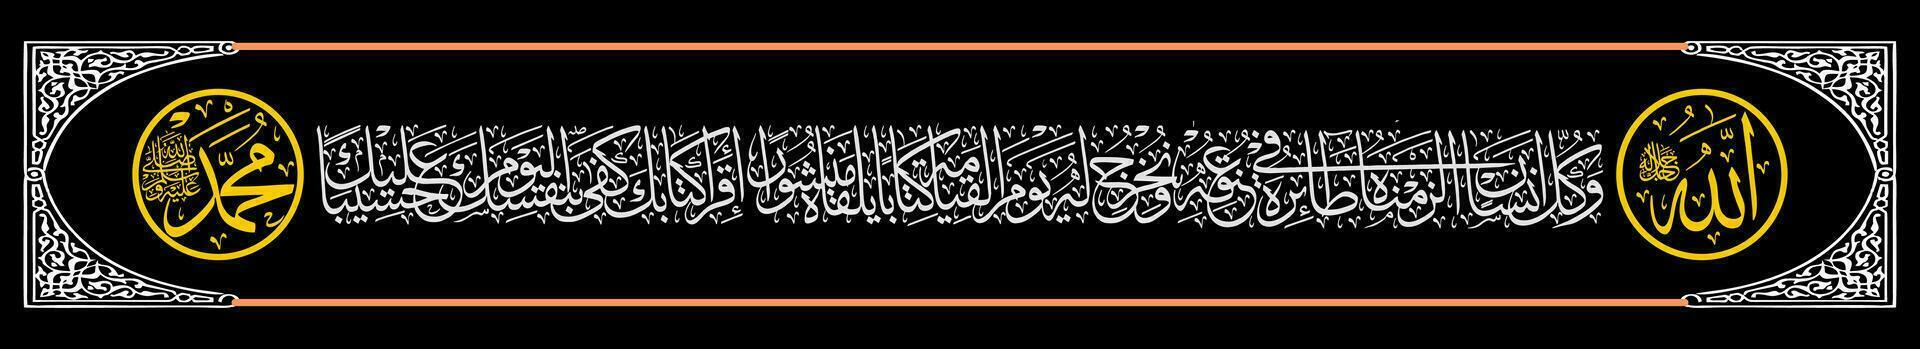 Calligraphy Thuluth Al Qur'an Surat Al Isra 13 which means And every human being We have placed a record of his deeds around his neck. And on the Day of Resurrection We vector